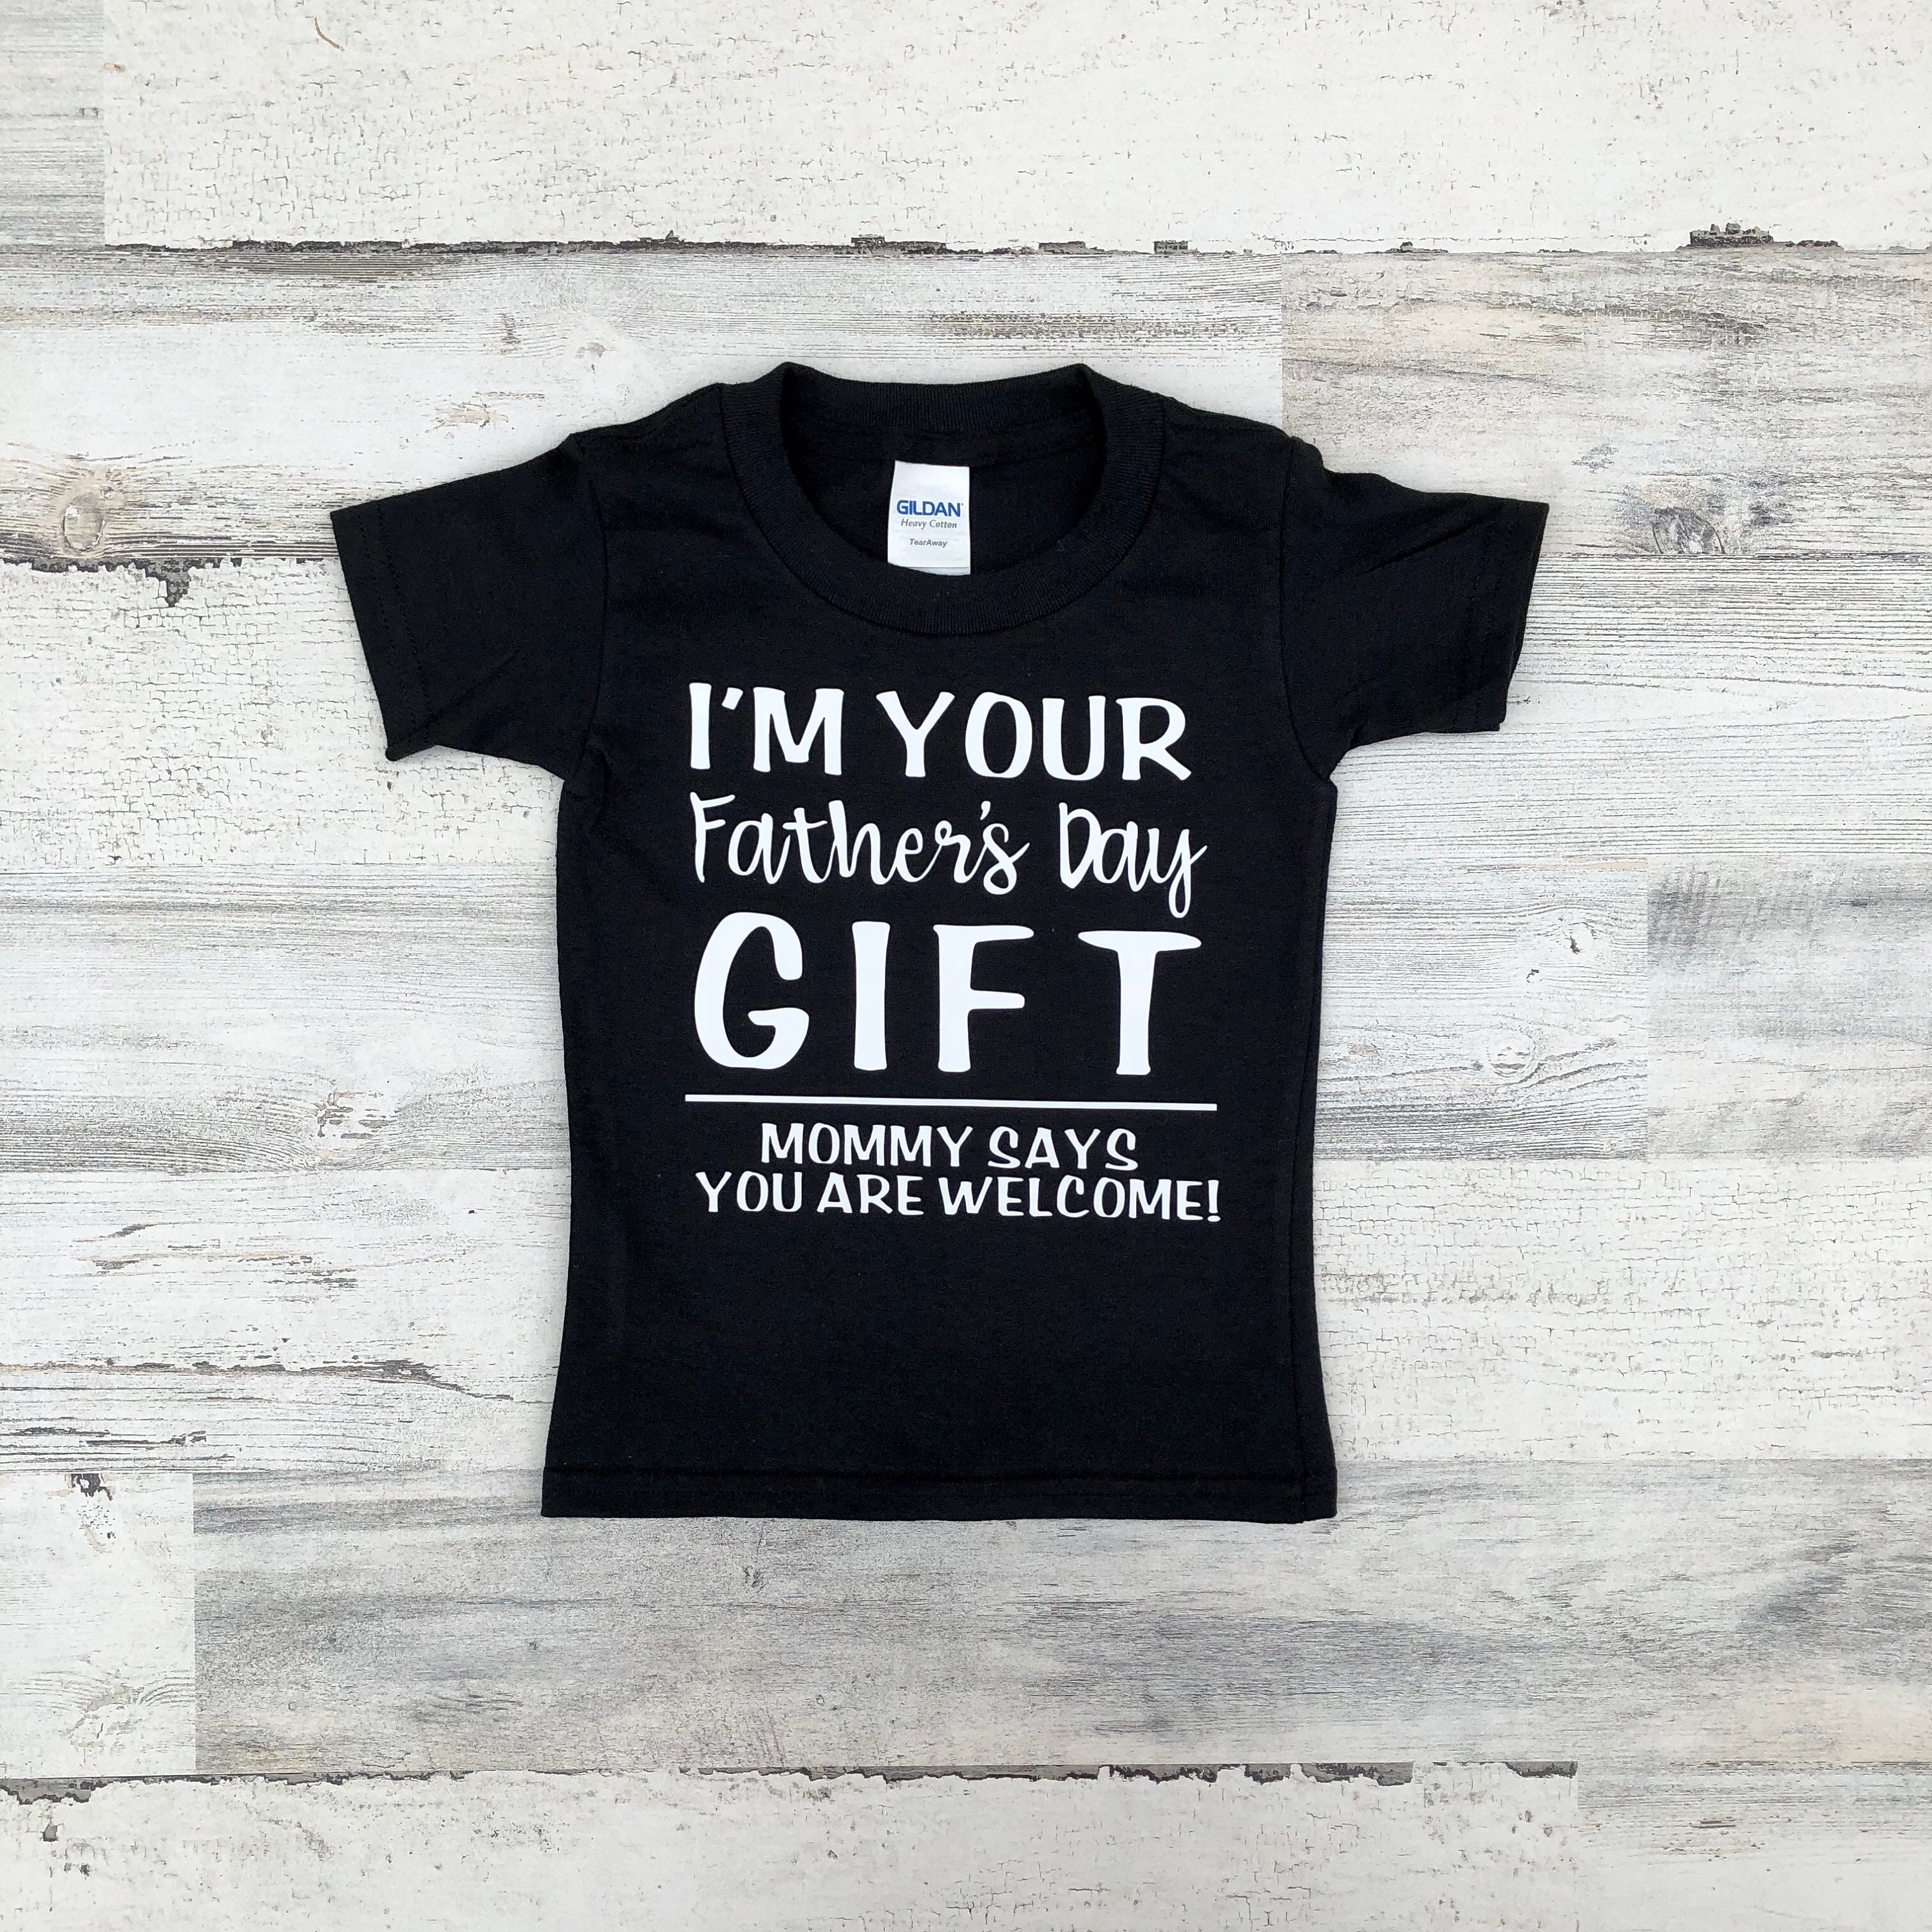 Father's Day Shirt - Im your Father's Day gift Mom says your welcome